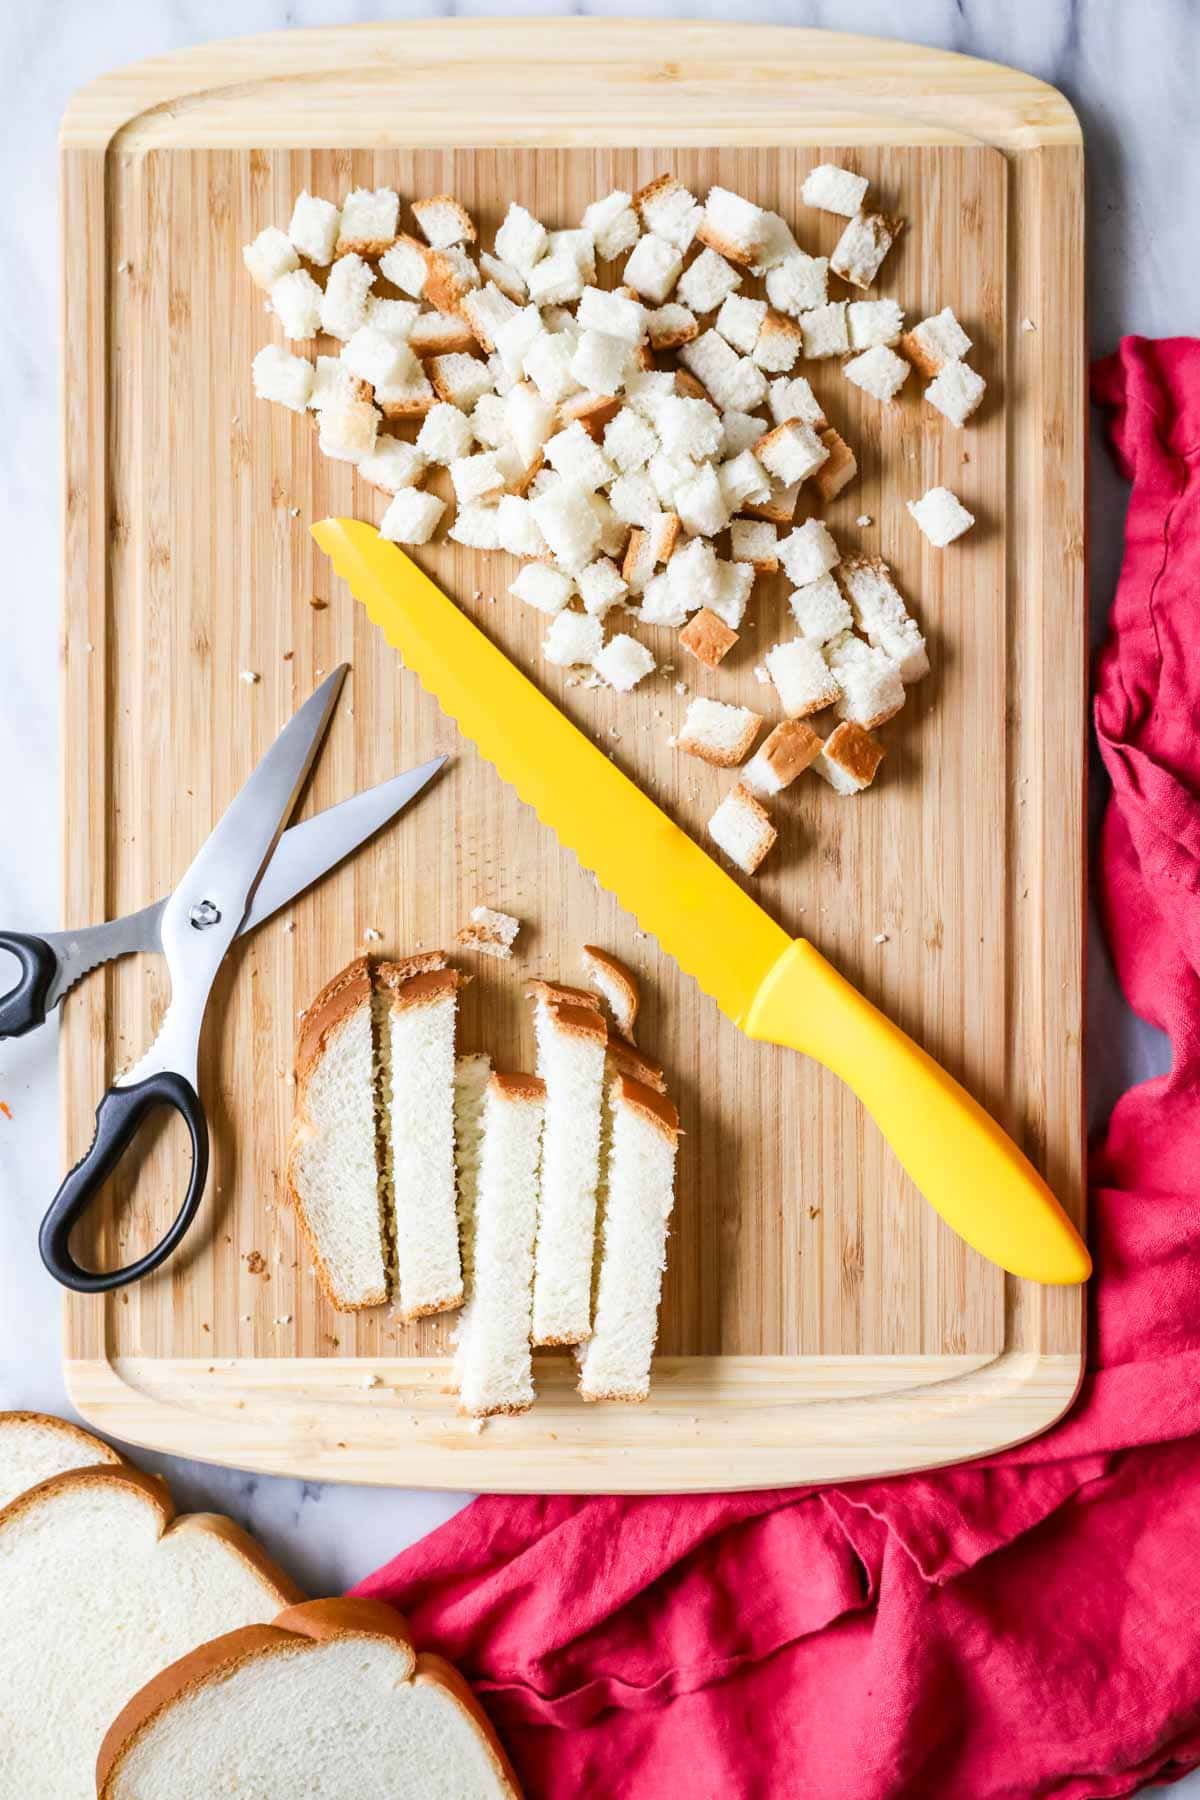 Overhead view of bread slices being cut into cubes on a cutting board.